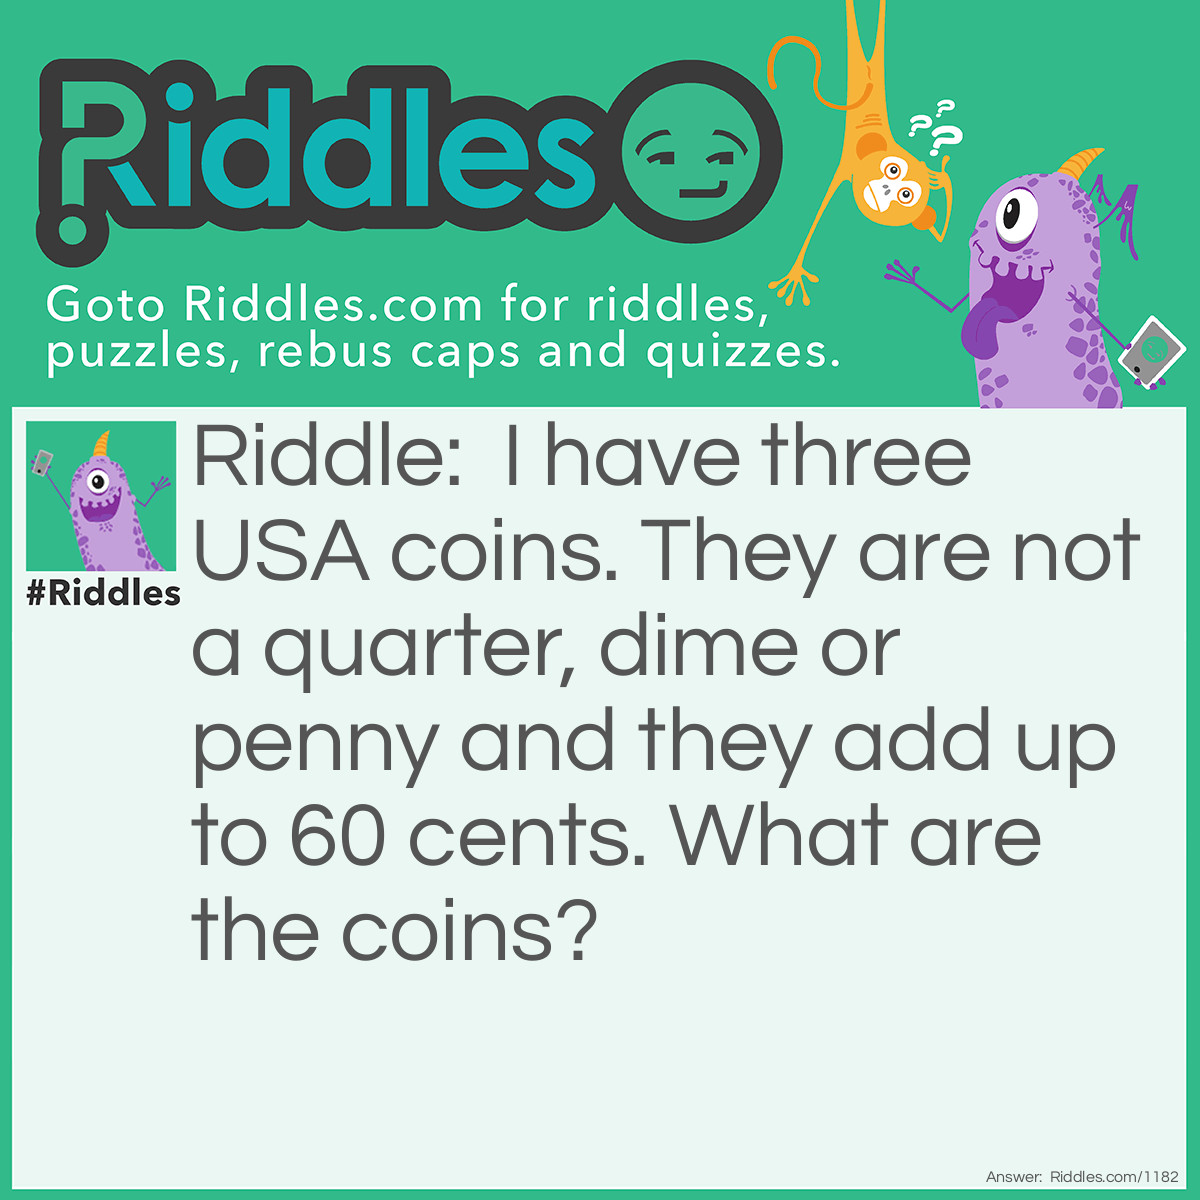 Riddle: I have three USA coins. They are not a quarter, dime or penny and they add up to 60 cents.
What are the coins? Answer: A 50 cent piece and 2 nickels.